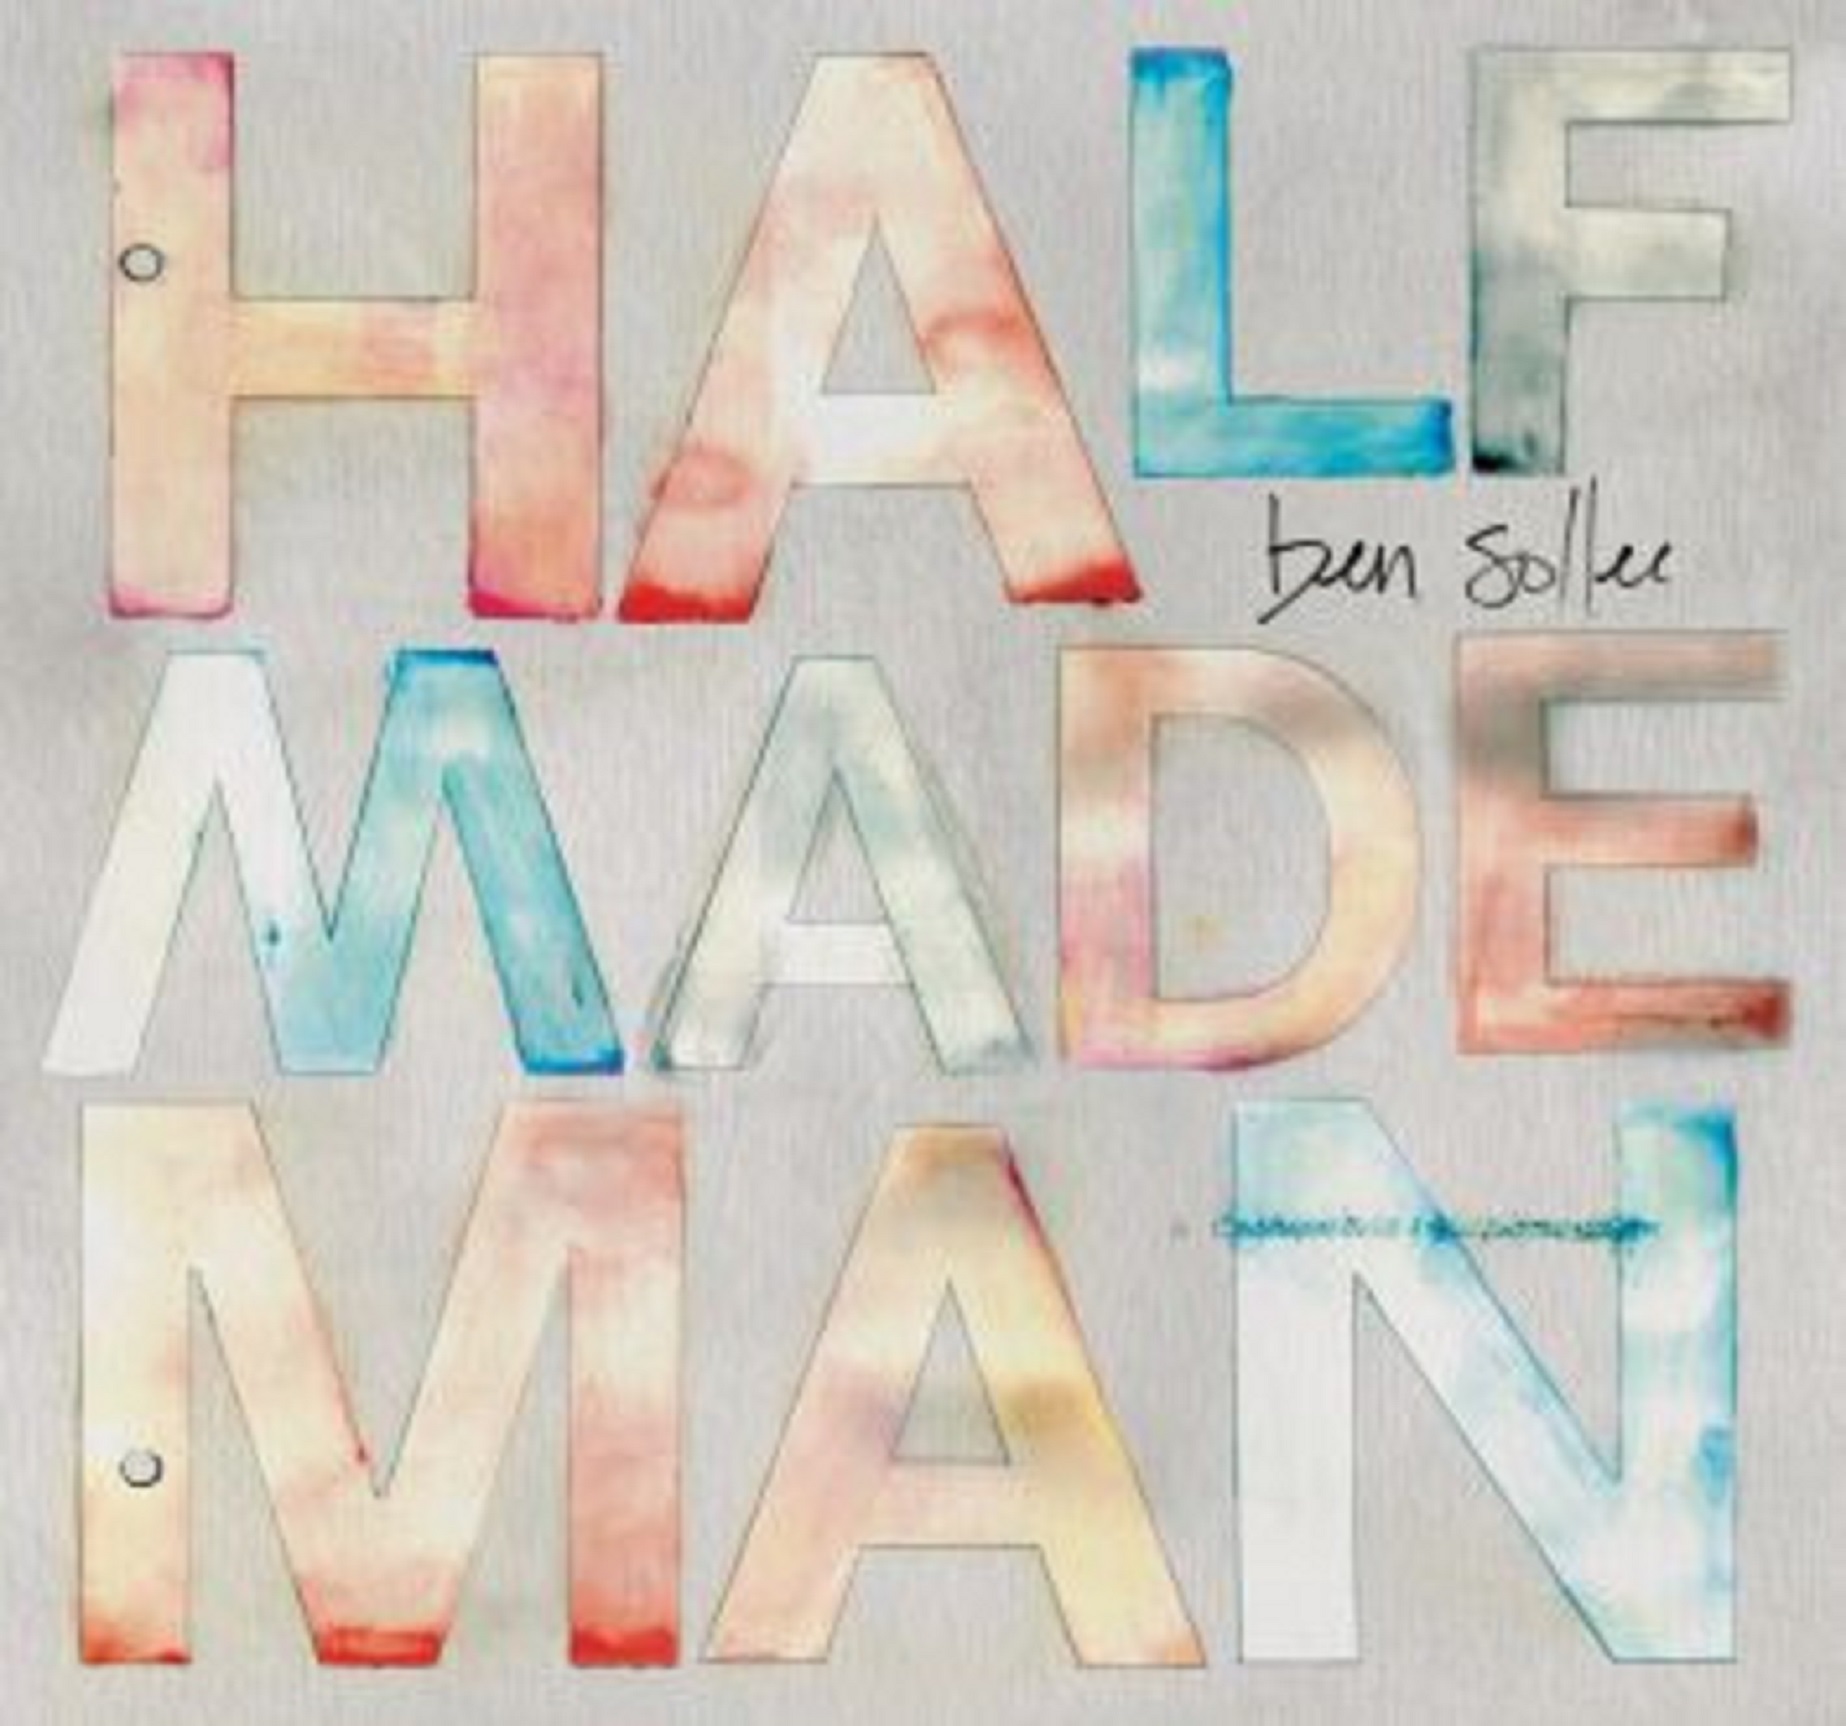 Ben Sollee | Half-Made Man | New Music Review